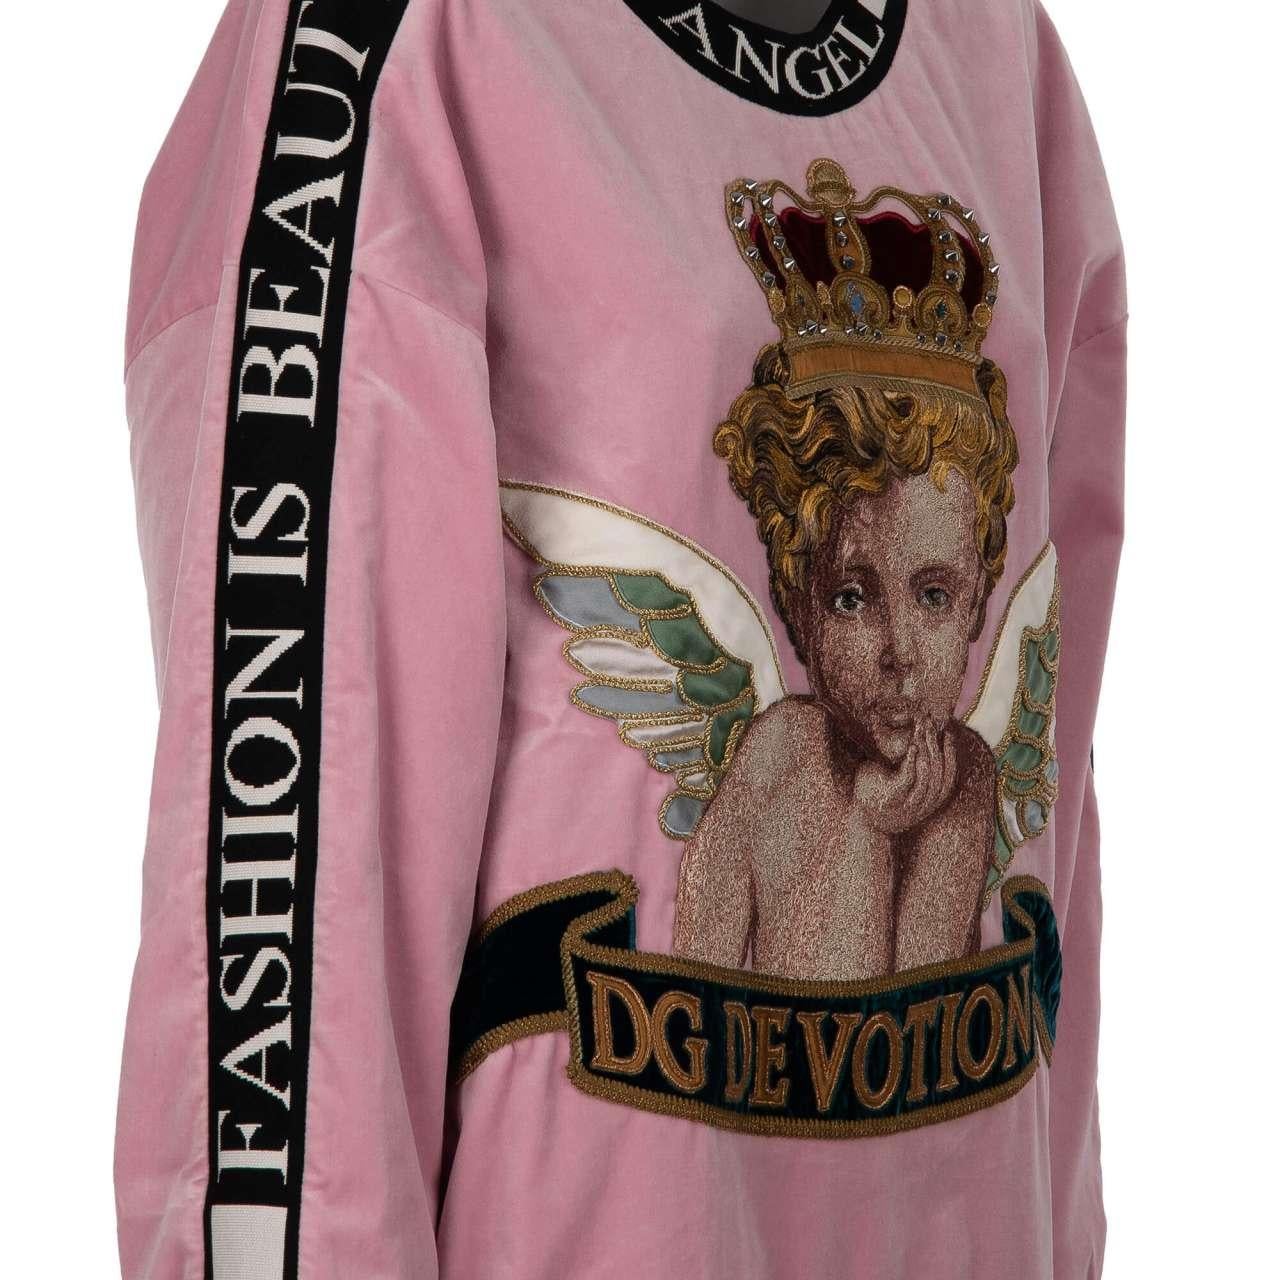 Women's D&G Velvet Oversize Sweater with Angel Crown Embroidery DG Devotion Pink IT 40 For Sale